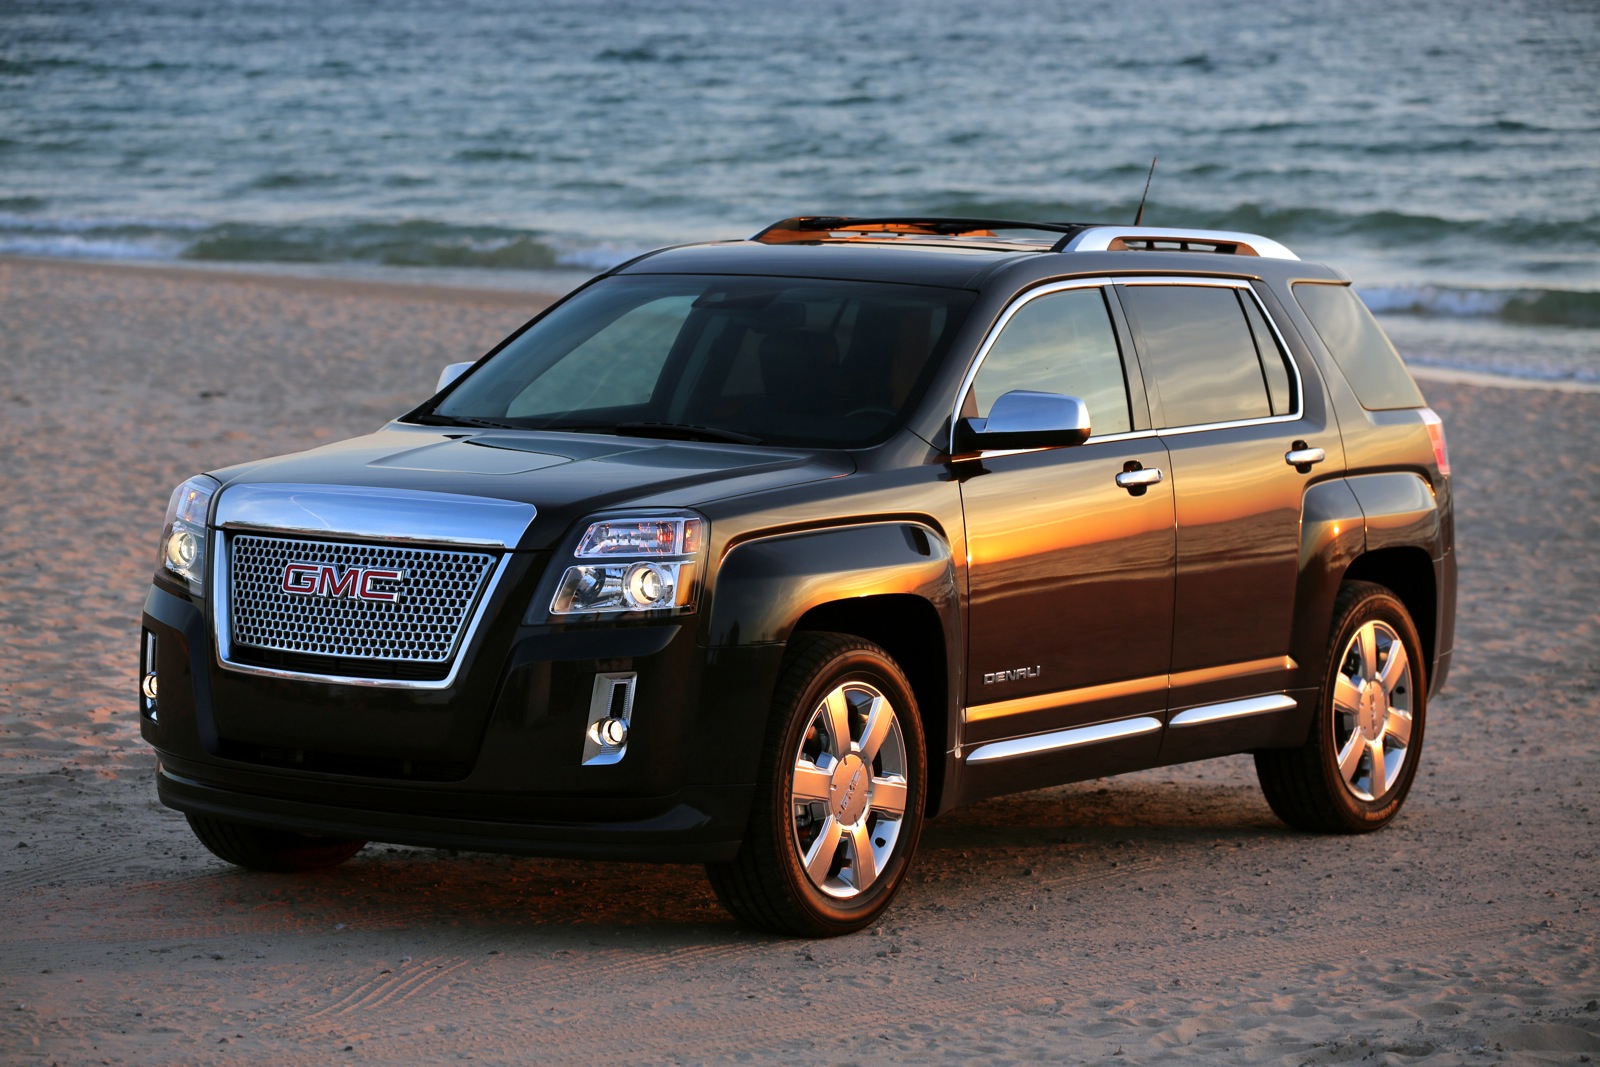 2013 GMC Terrain prices and expert review - The Car Connection